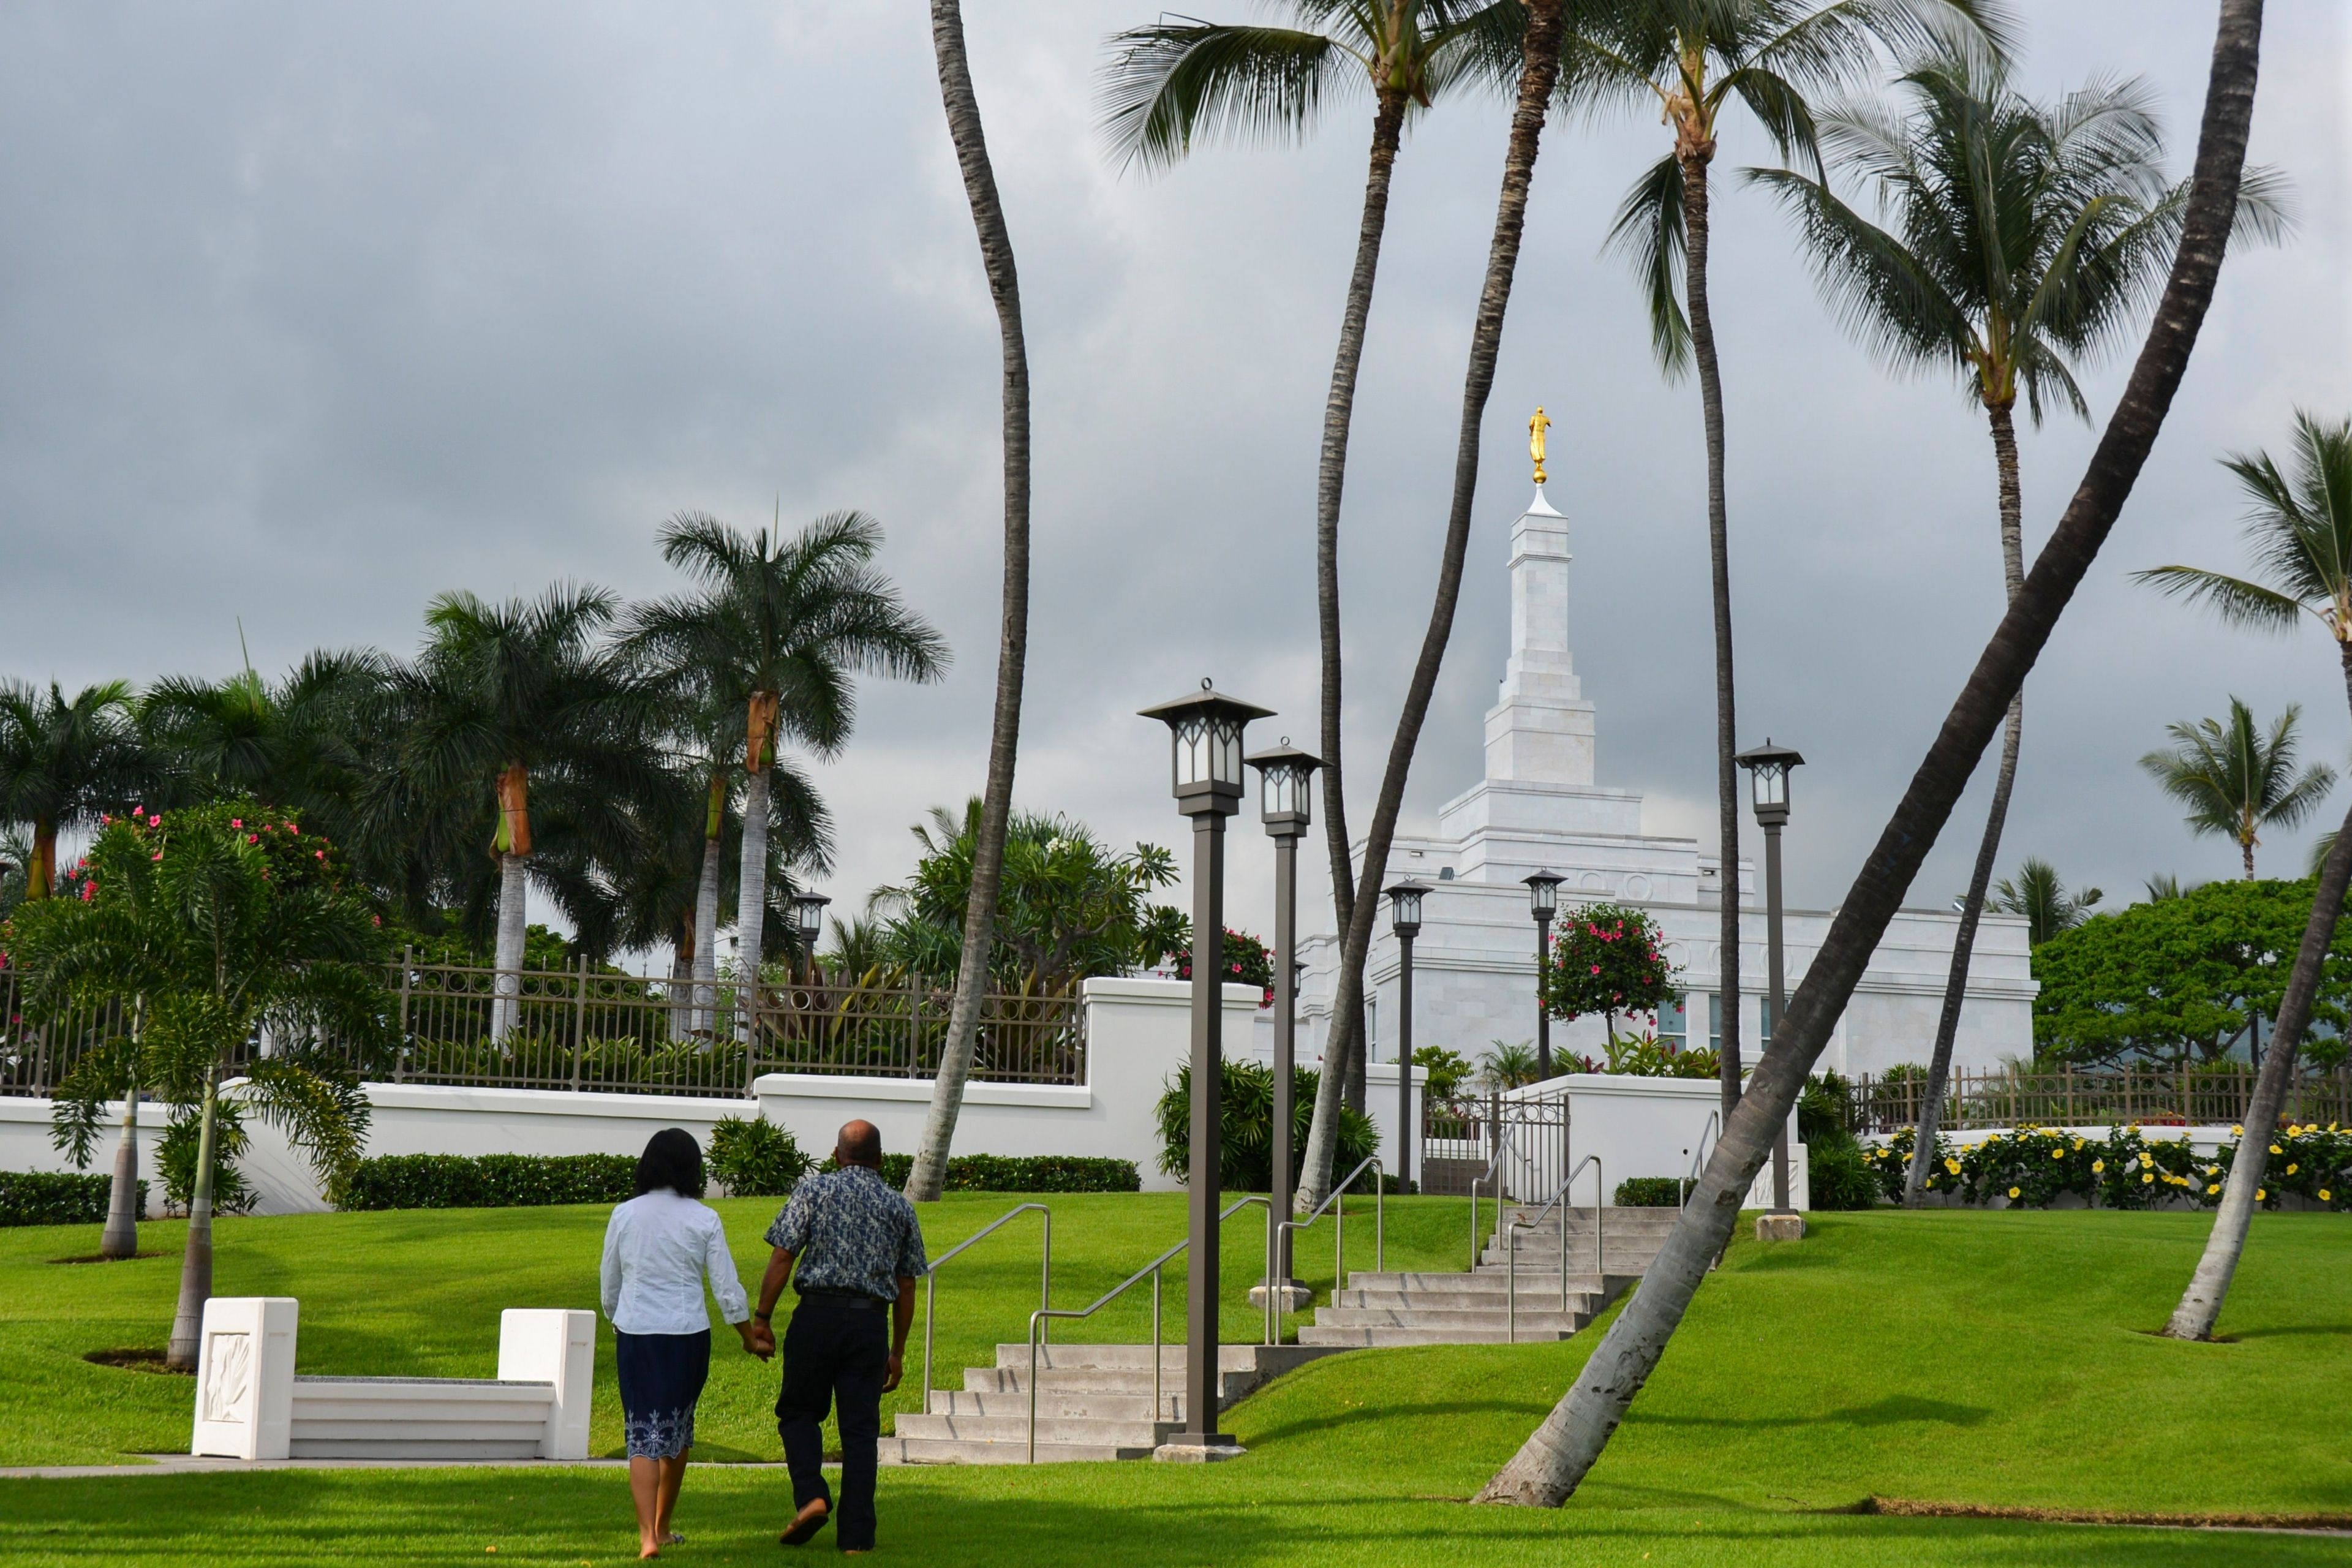 A couple walking on the grounds of the Kona Hawaii Temple.